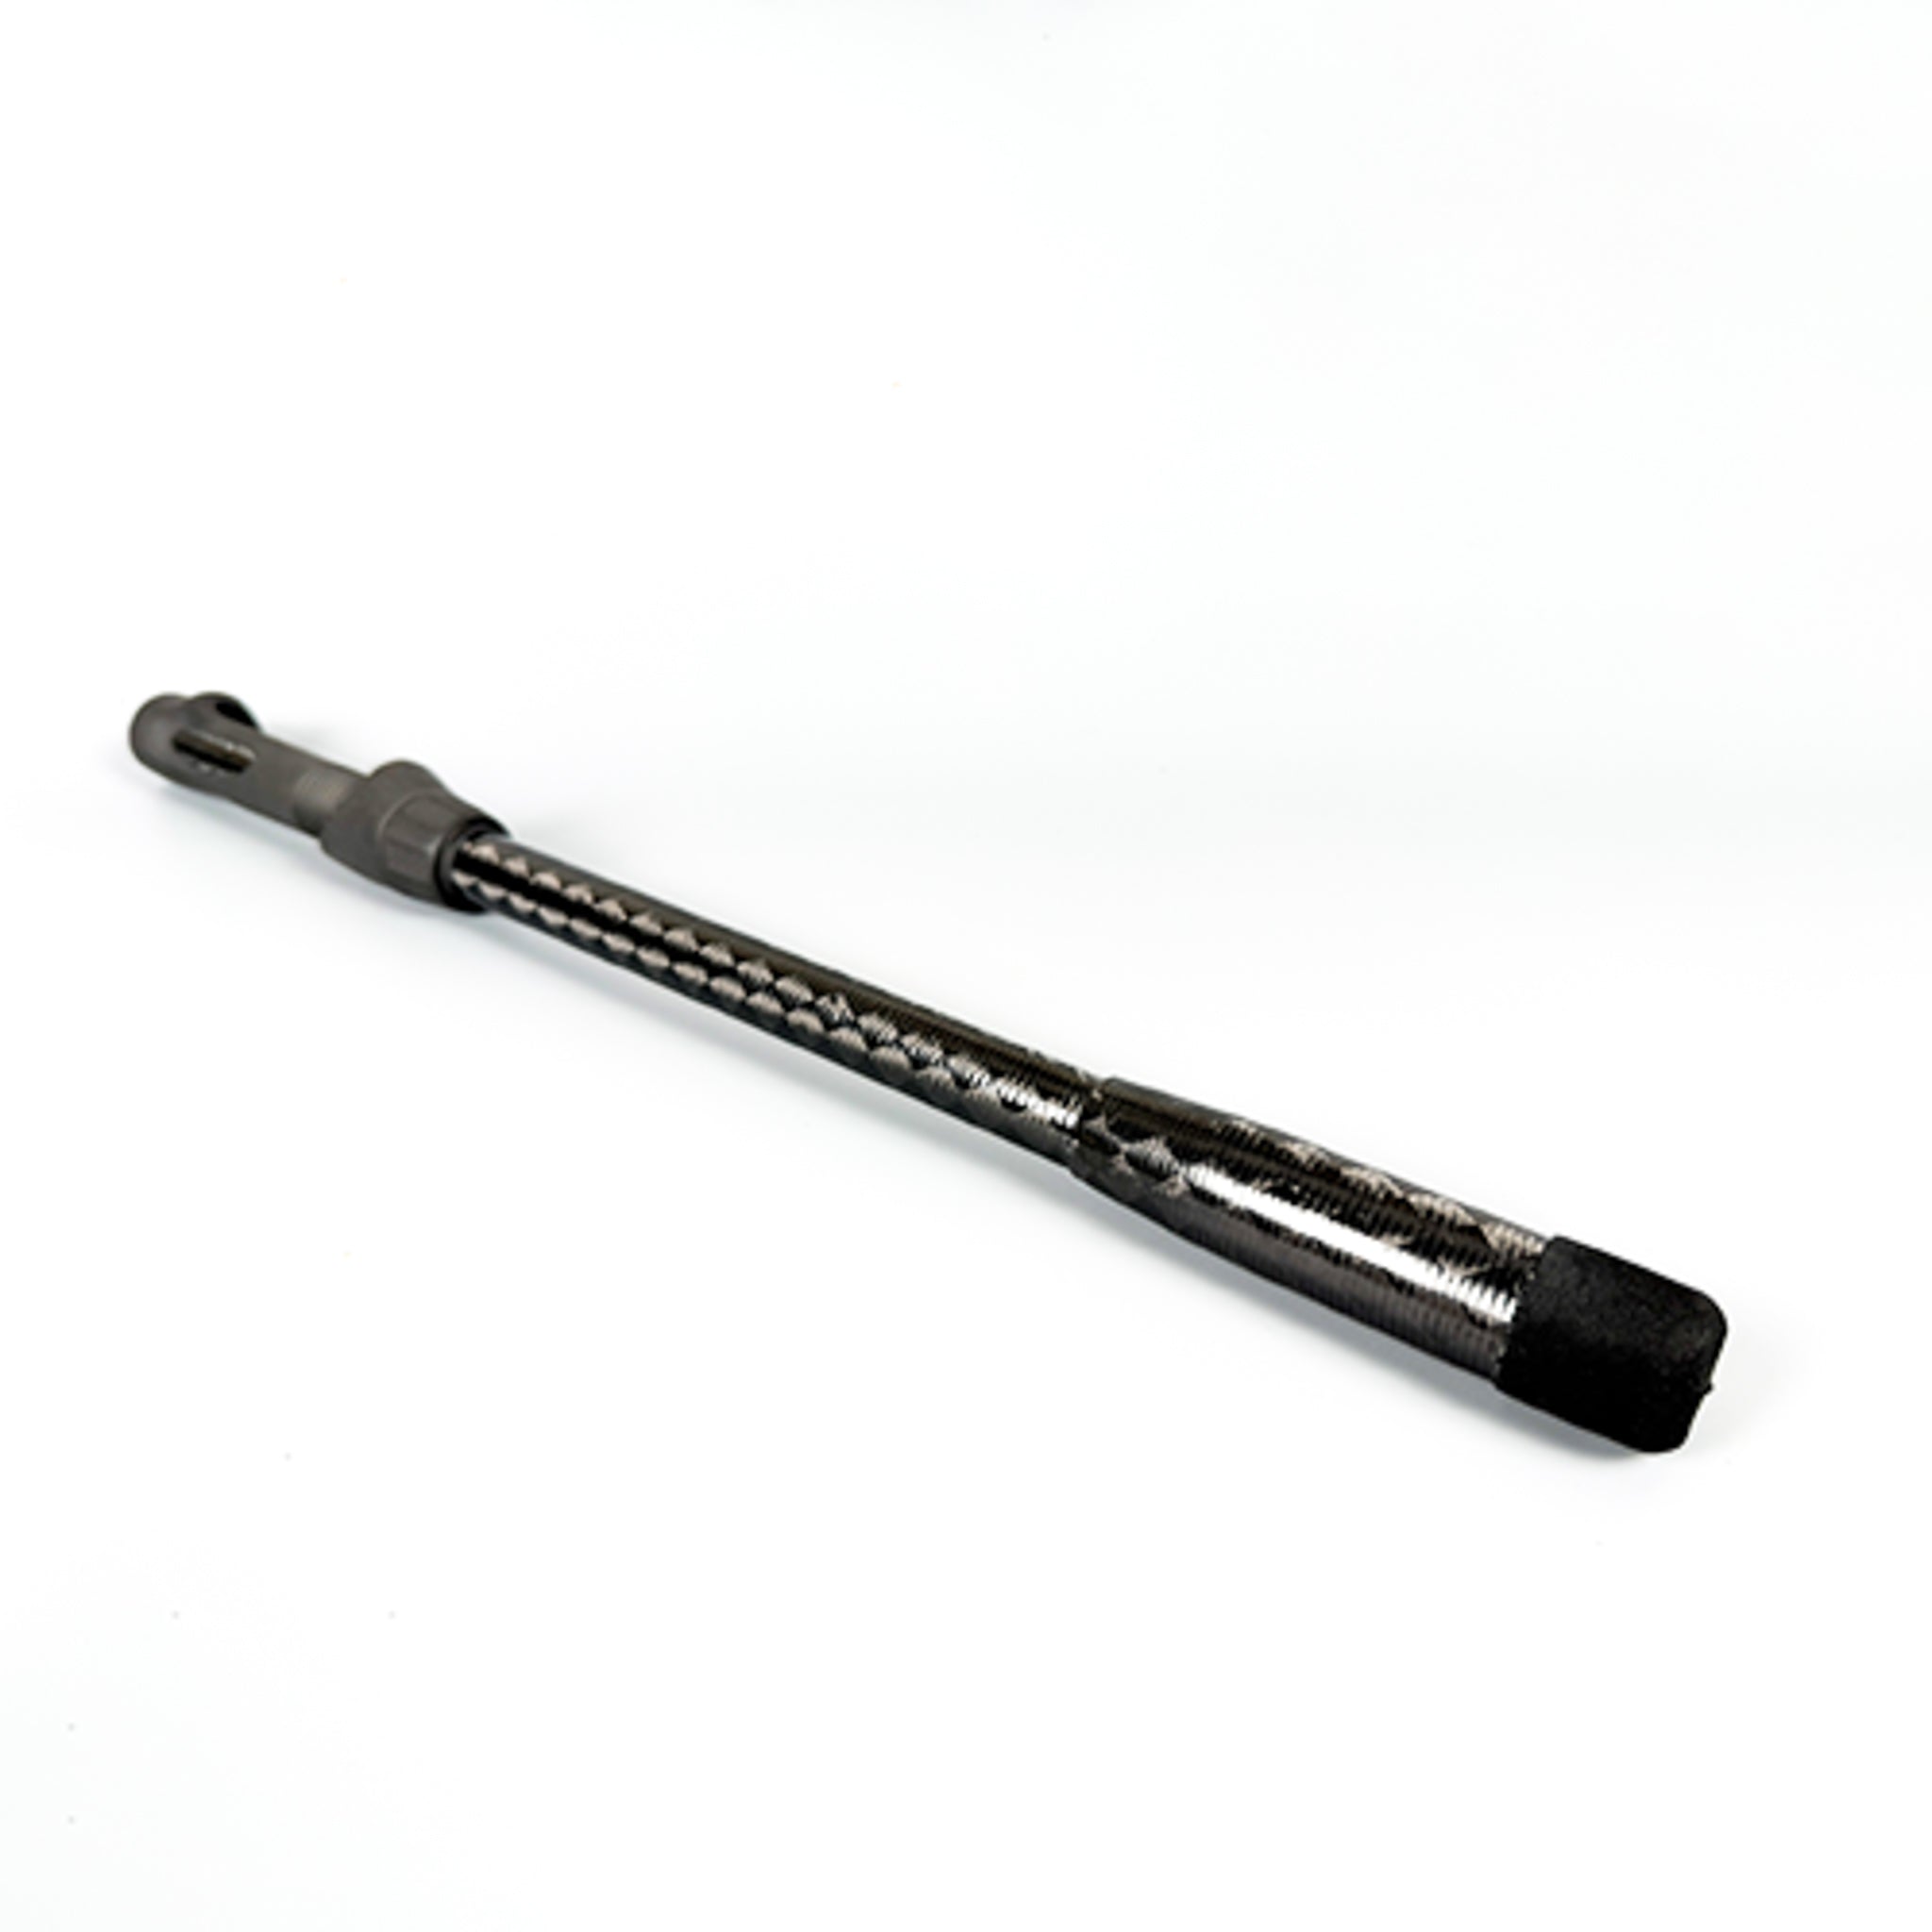 14" Carbon Fiber Tapered Spinning | Finished Handle - .592"ID